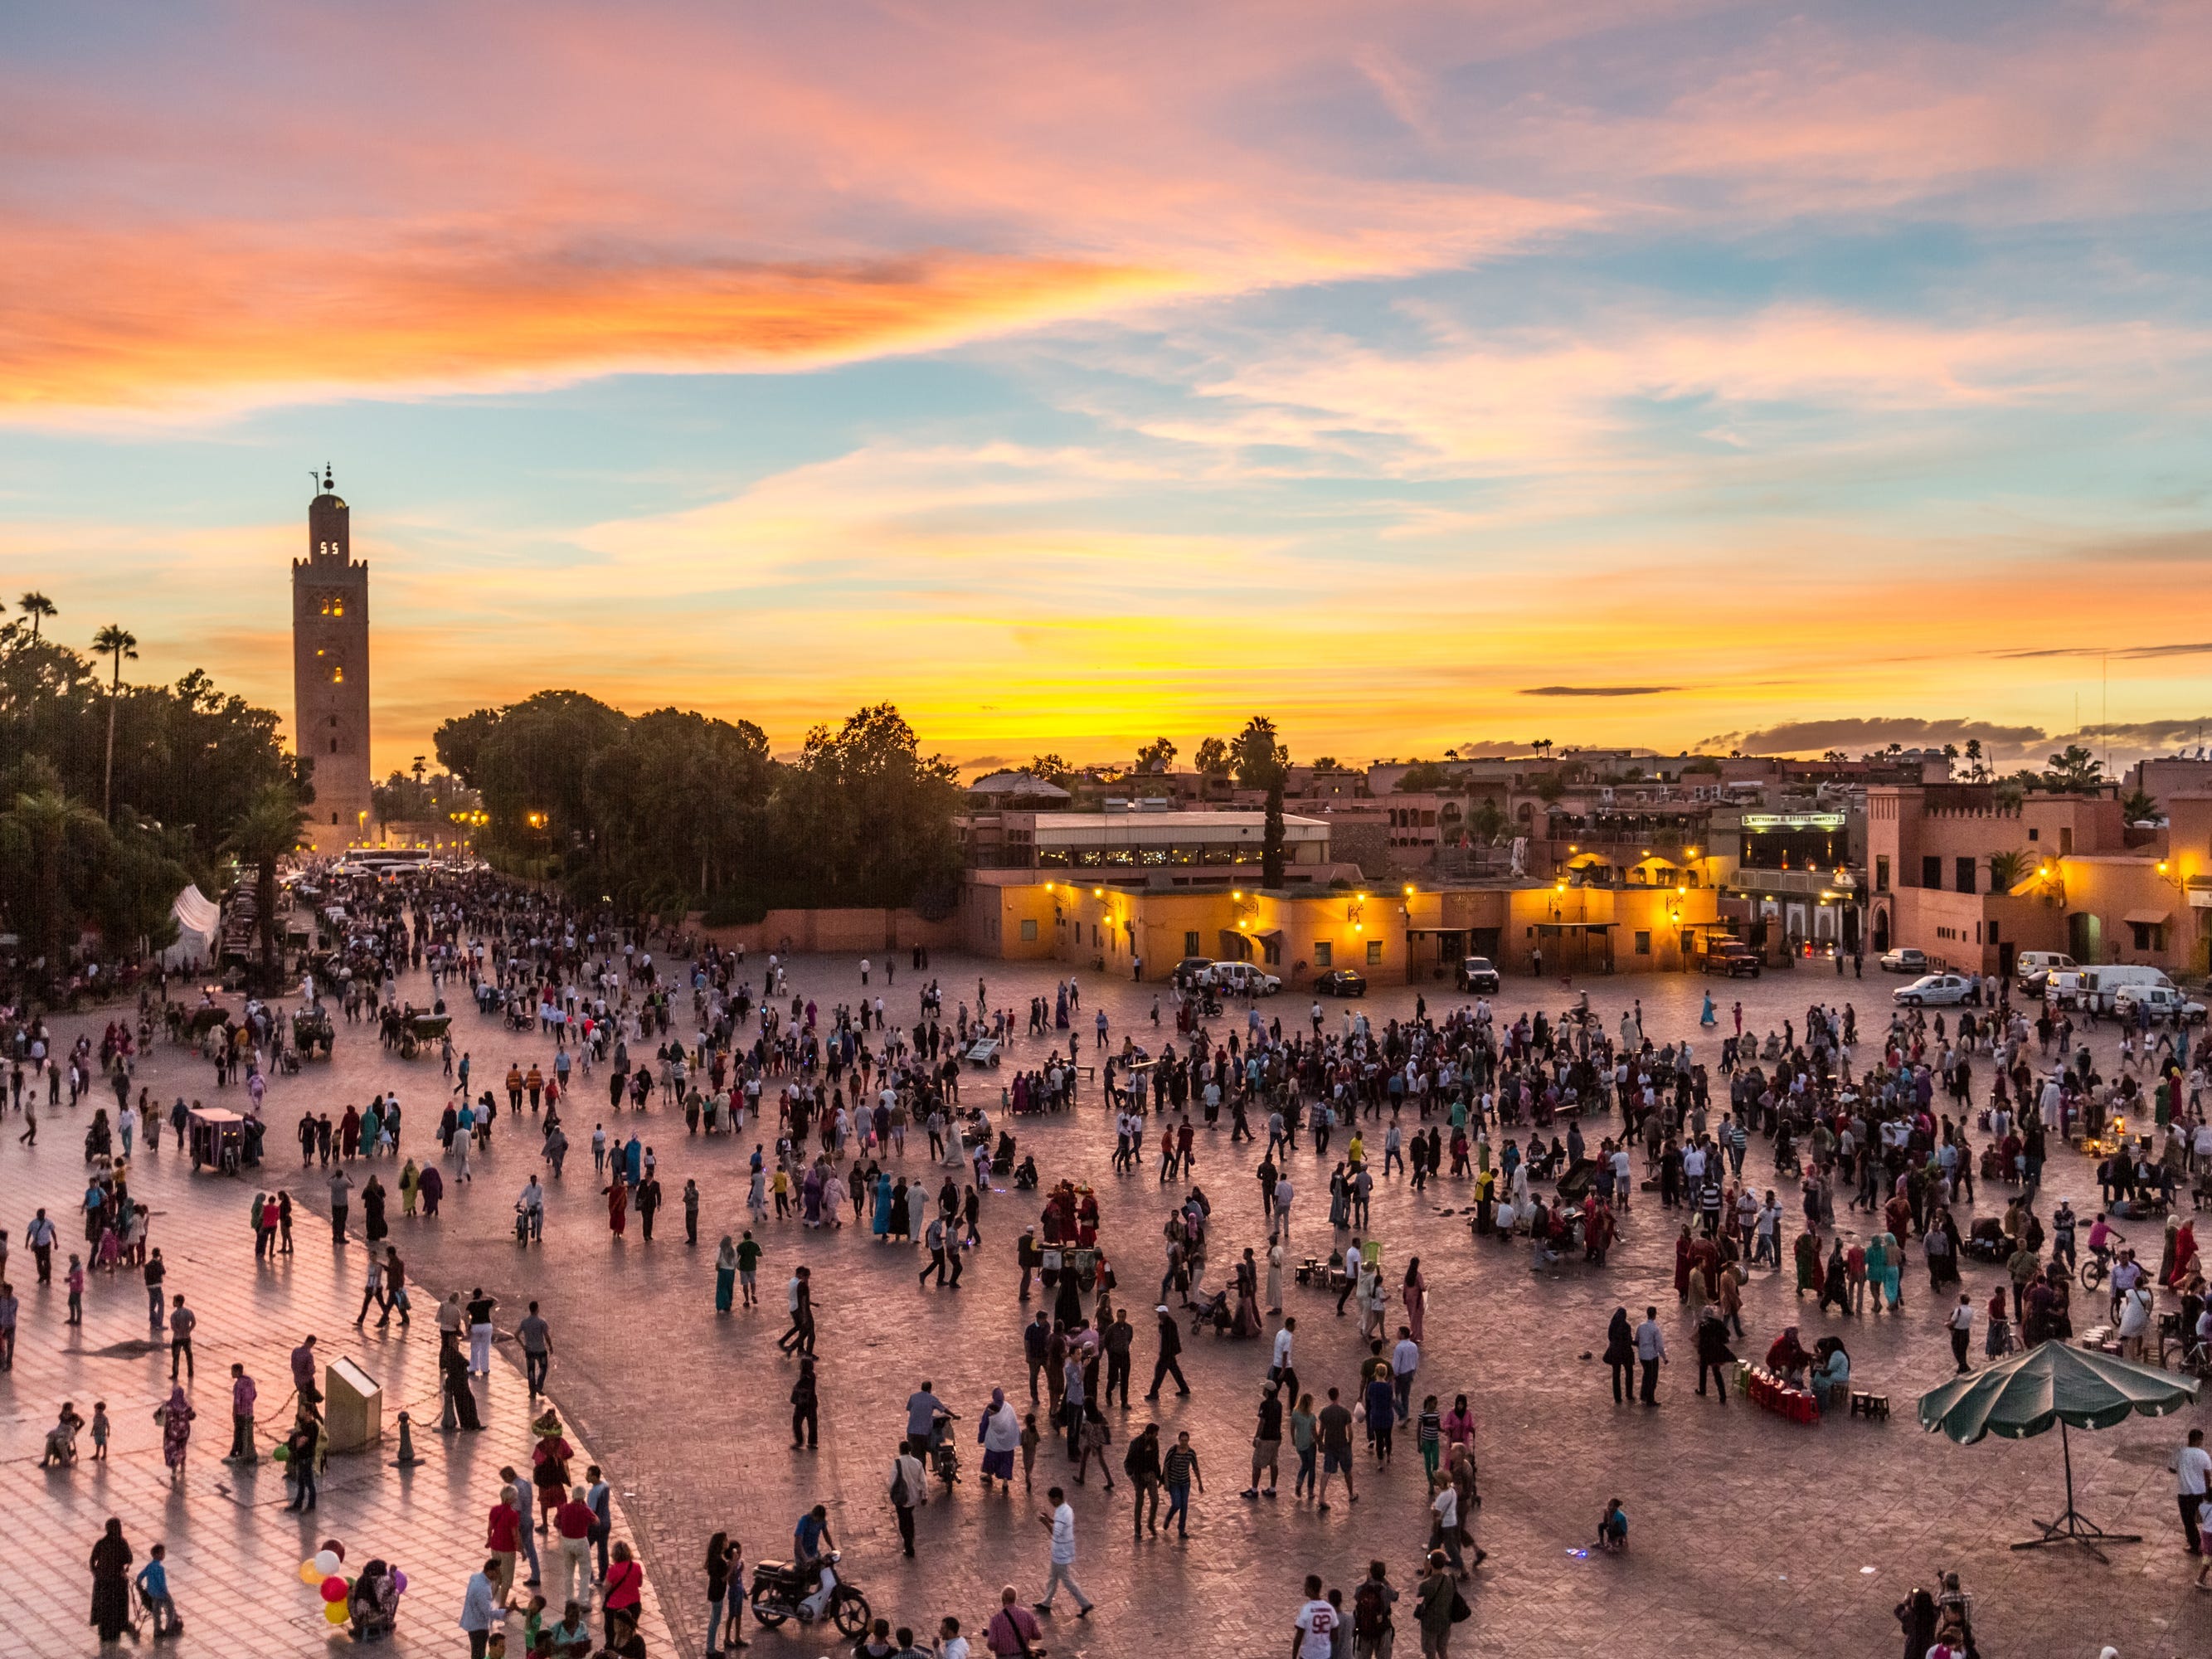 <p>My husband and I traveled to Morocco with his parents in 2013. Arriving in Marrakesh was a real culture shock for his folks, who were from country Victoria in Australia.</p><p>There was so much to see, from the snake charmers in Jemaa el-Fnaa Square to the donkeys cruising up and down streets.</p><p>The highlight of our trip was a tour of a Berber camp in the Sahara Desert, complete with a camel trek. We ate chicken tagine under the stars and chatted with our host about life in the desert. It was a once-in-a-lifetime experience I'll never forget.</p>